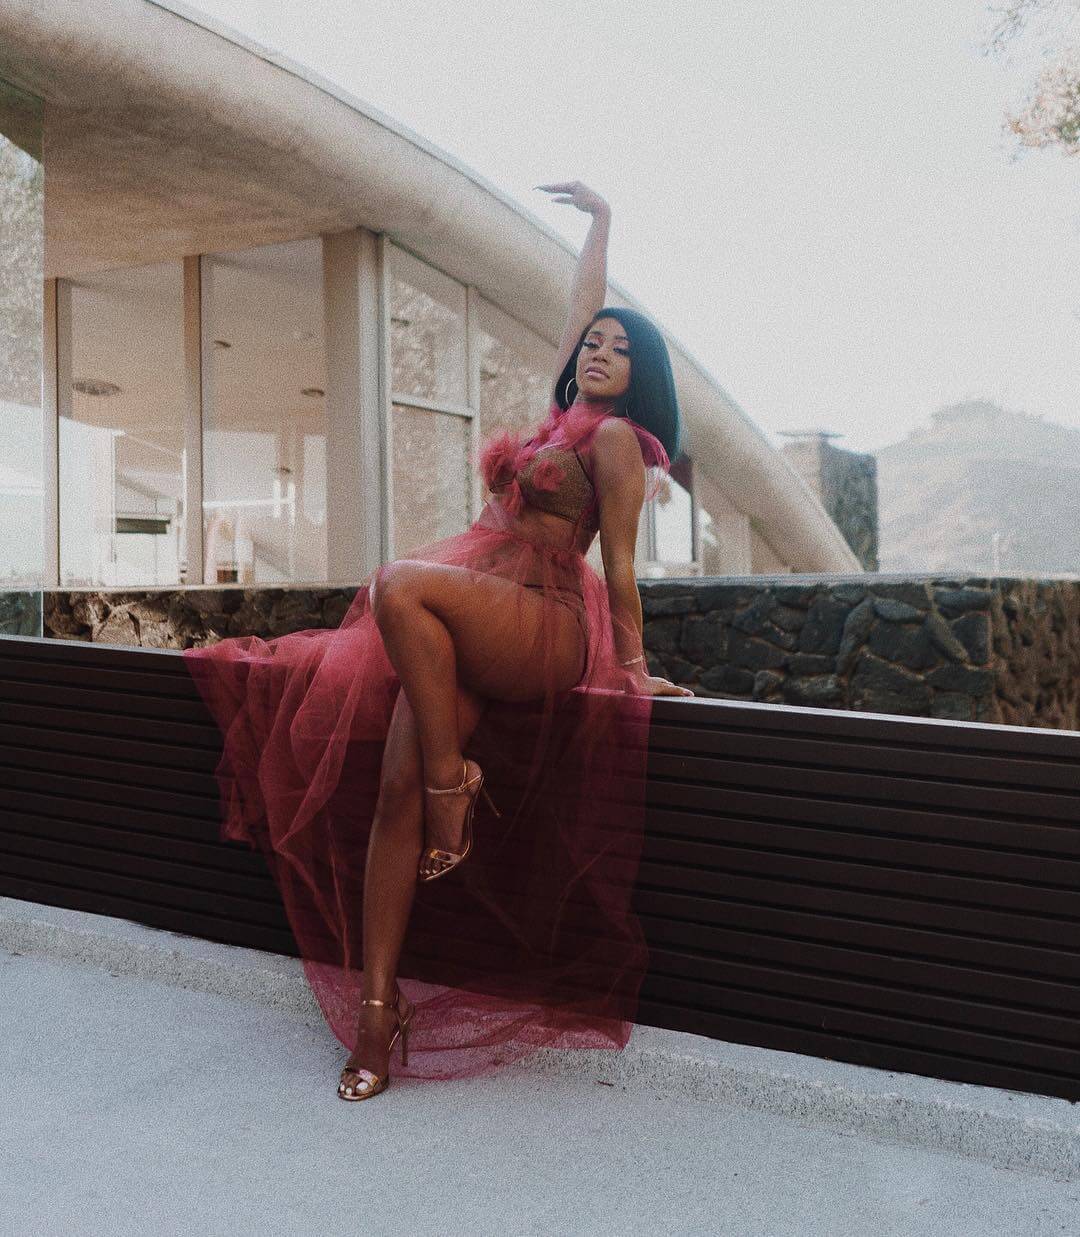 Hot Picture Of Saweetie Which Will Make You Forget Your Girlfriend